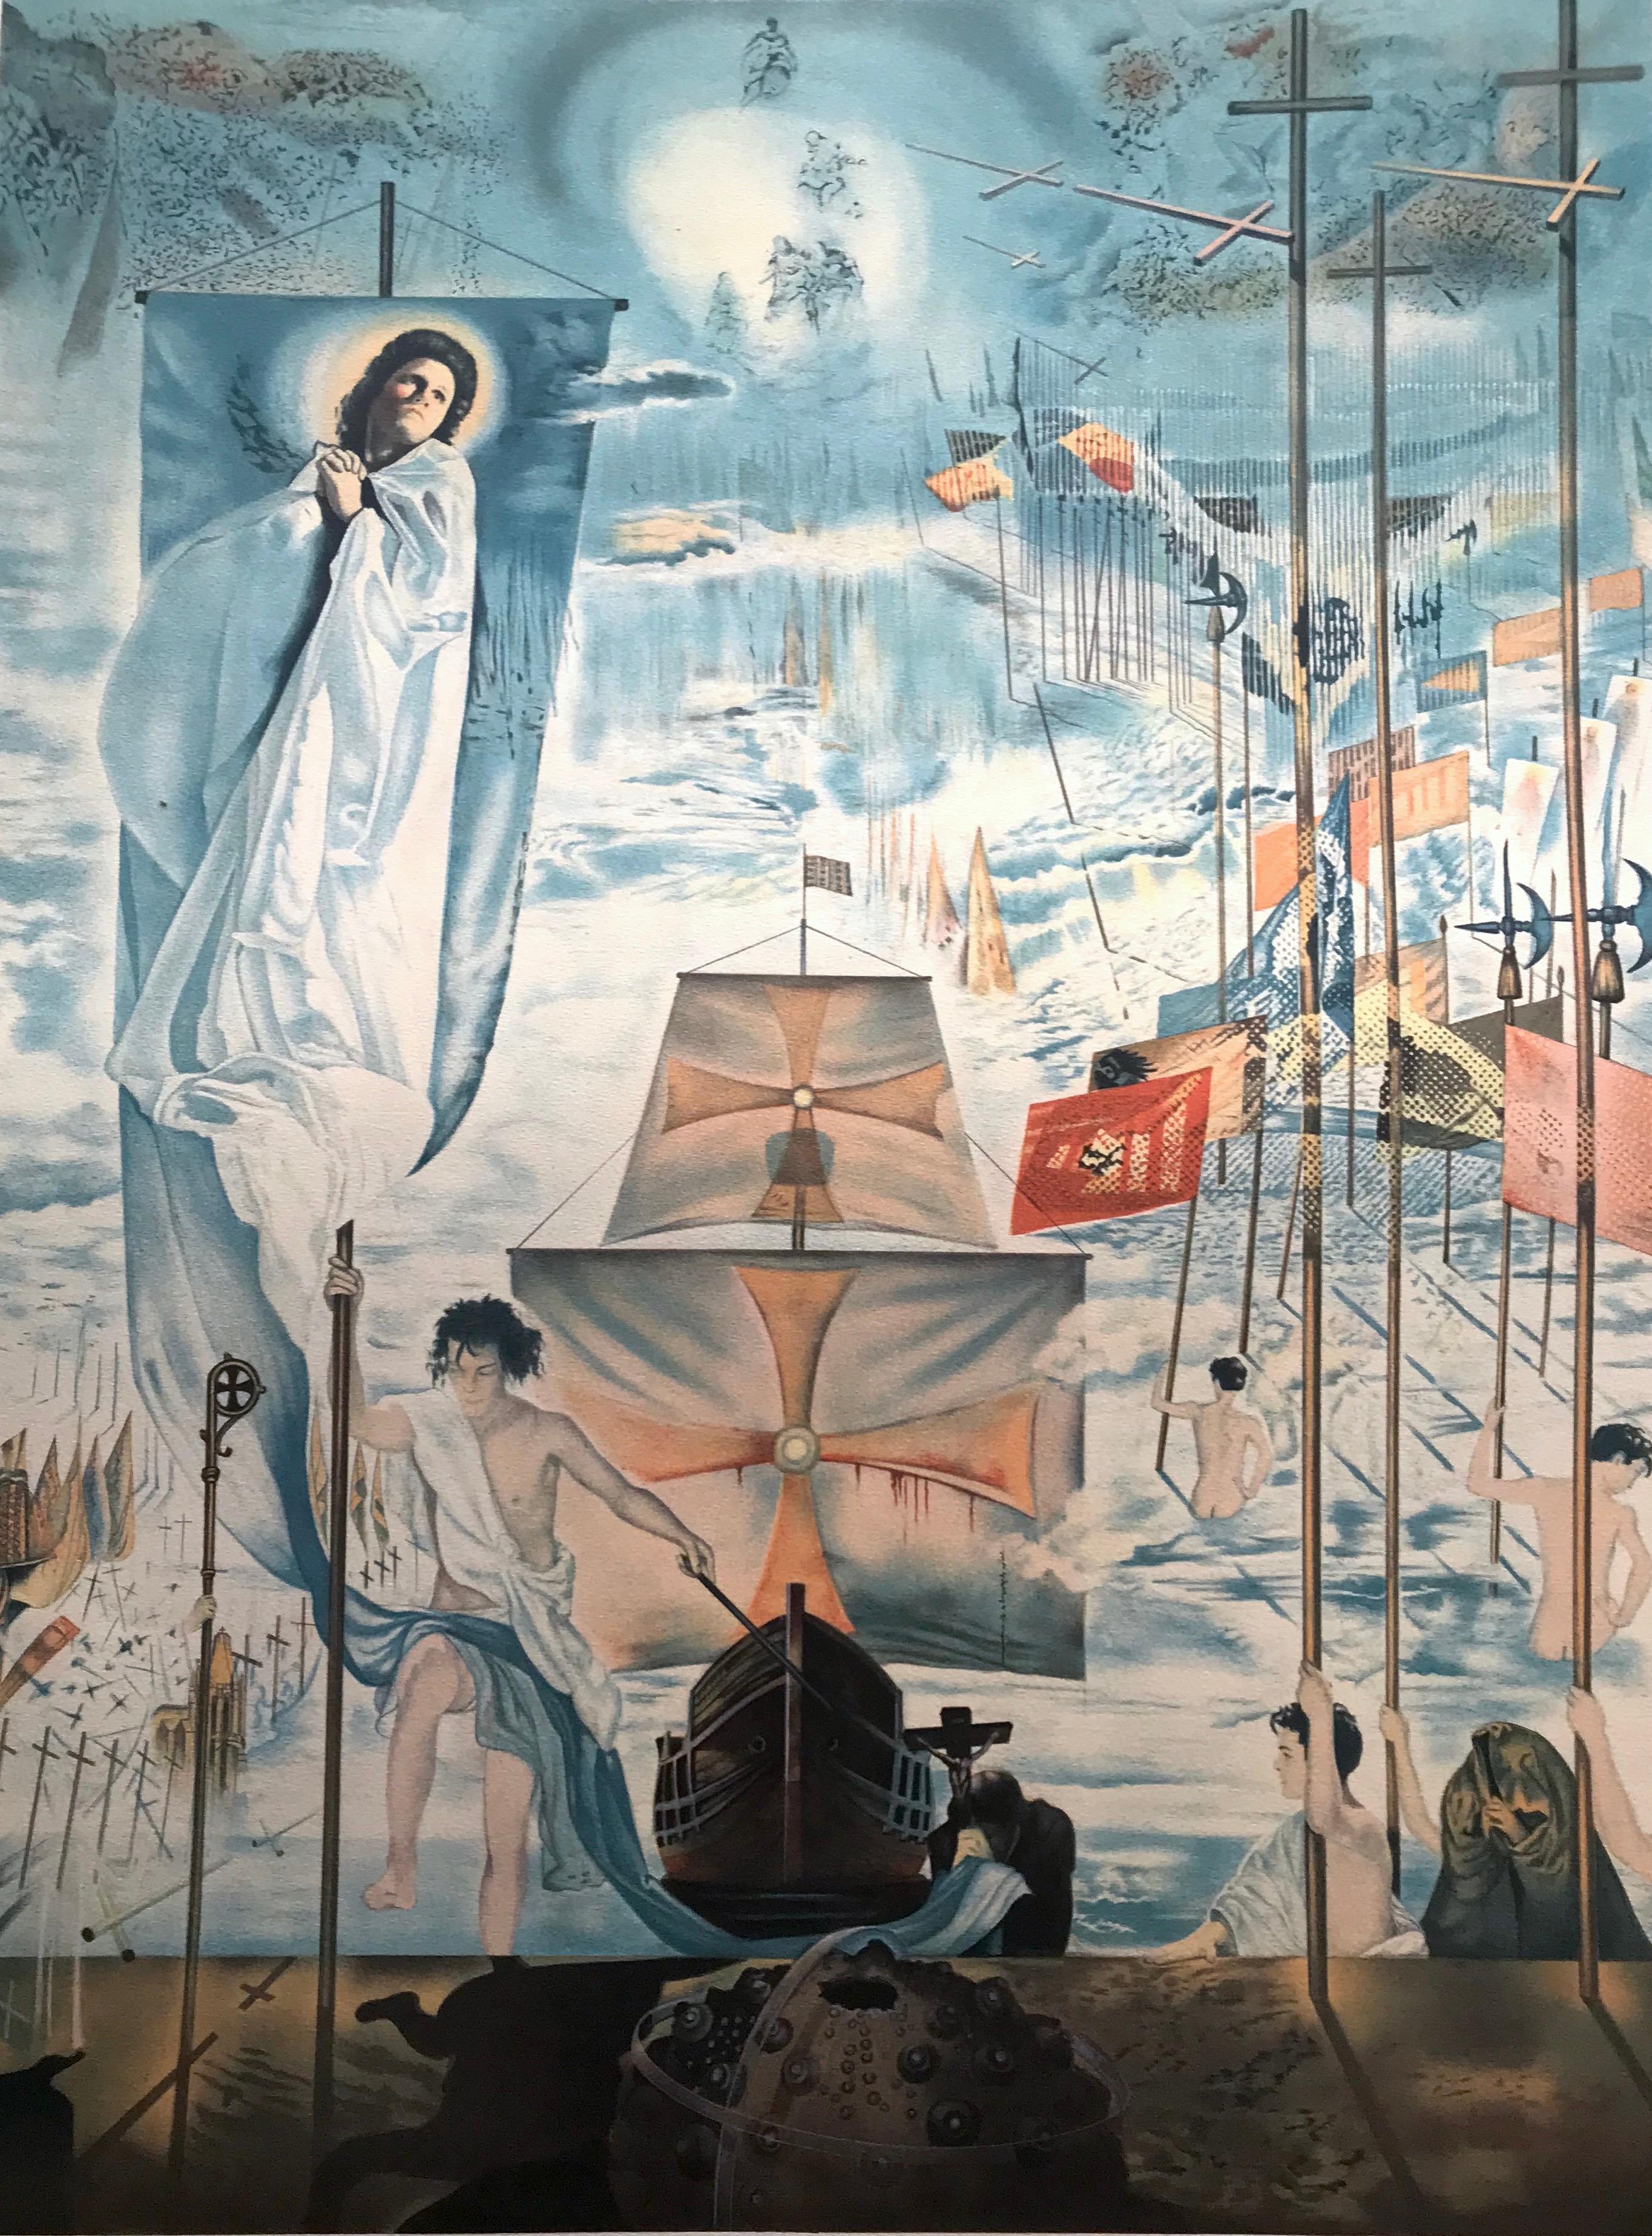 The Discovery of America by Christopher Columbus - Art by Salvador Dalí